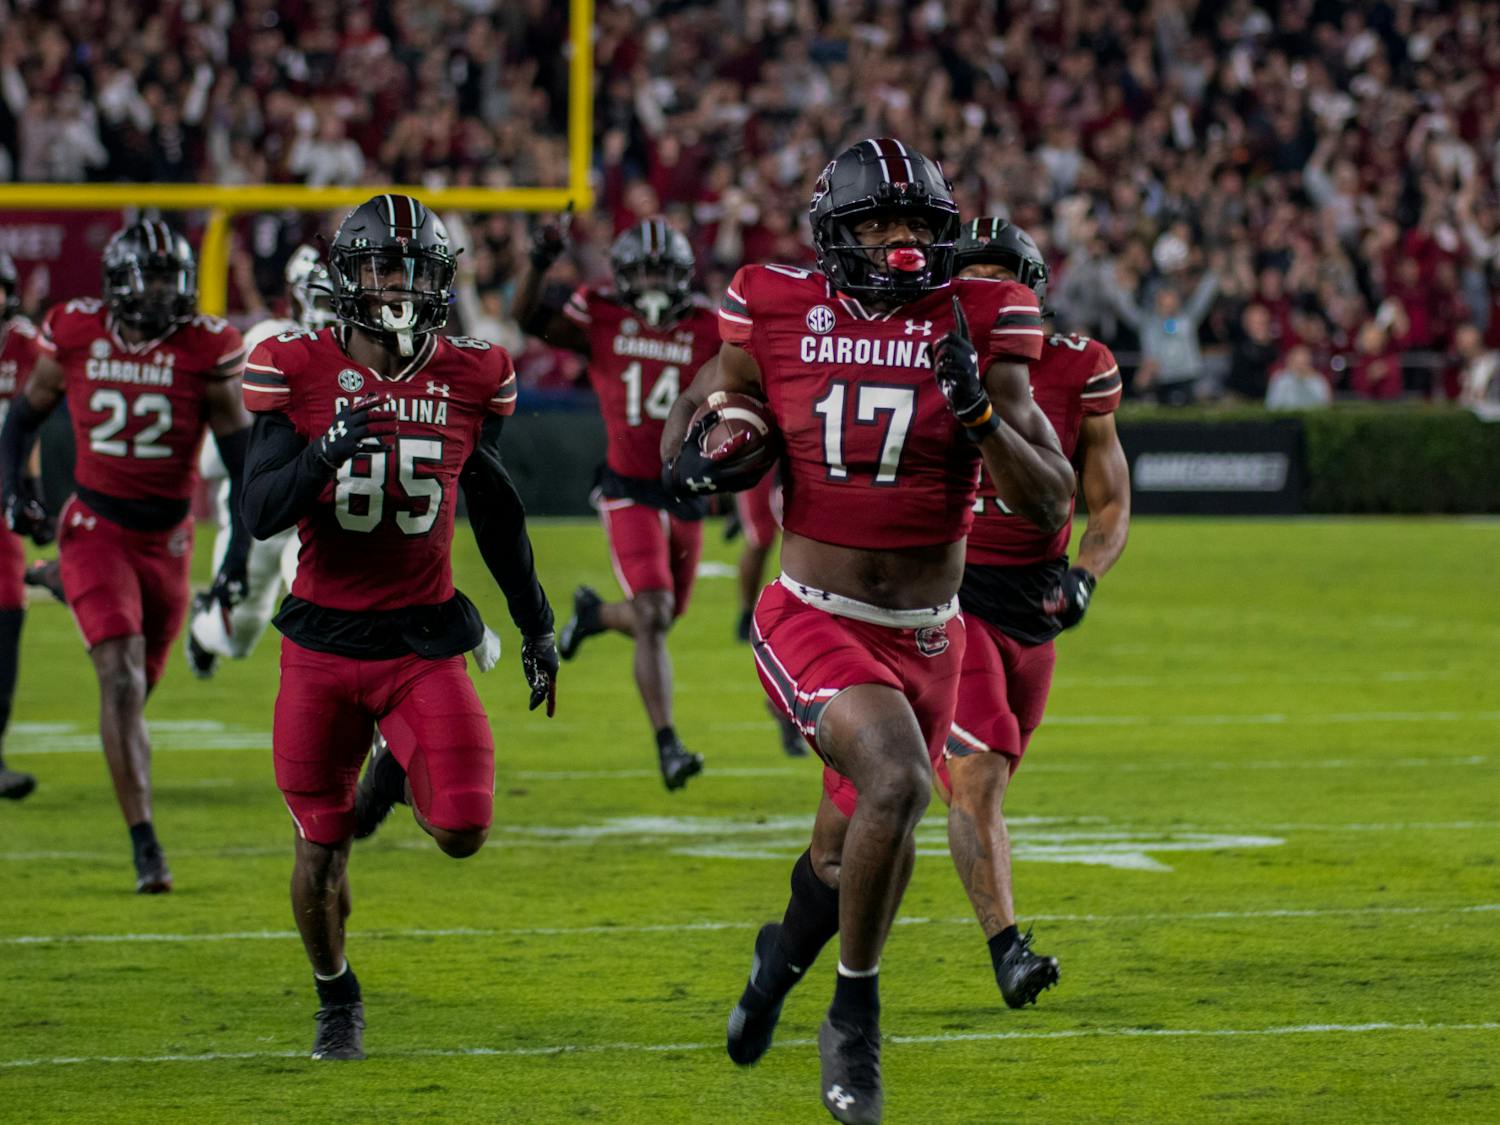 The South Carolina football team dominated Texas A&amp;M in its most recent game, starting off with a powerful first quarter. South Carolina defeated the Aggies 30-24 in a back-and-forth game on Oct. 22, 2022. &nbsp;